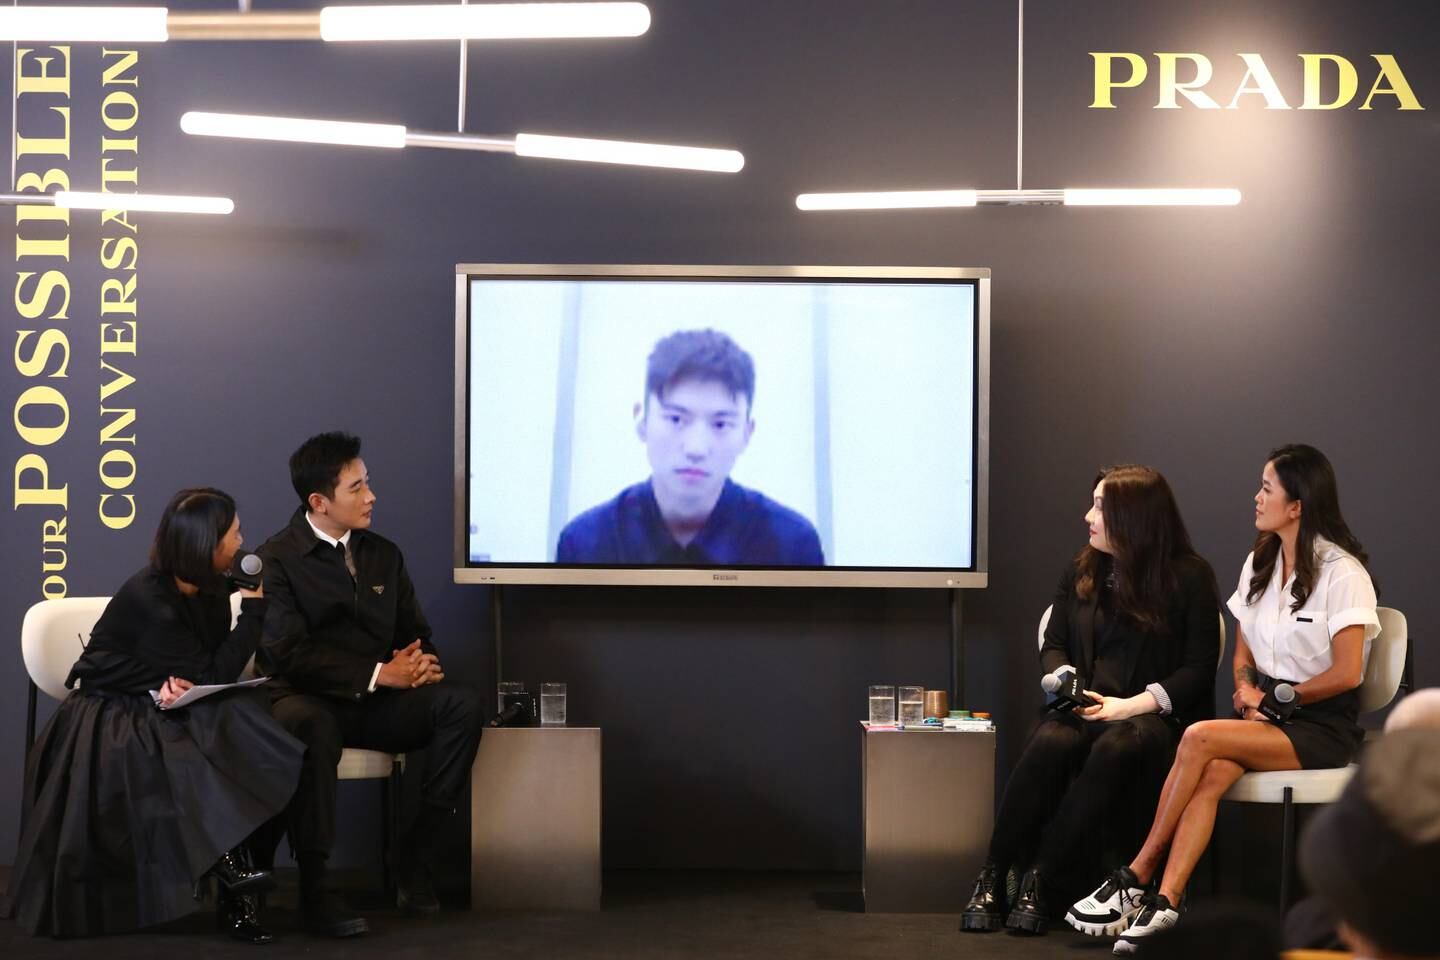 Surfer Monica Guo, actor Luo Jin, architect and professor Lyla Wu and swimmer Ning Zetao discuss ocean conservation at Prada's ‘Possible Conversations' talk on December 9. Prada.